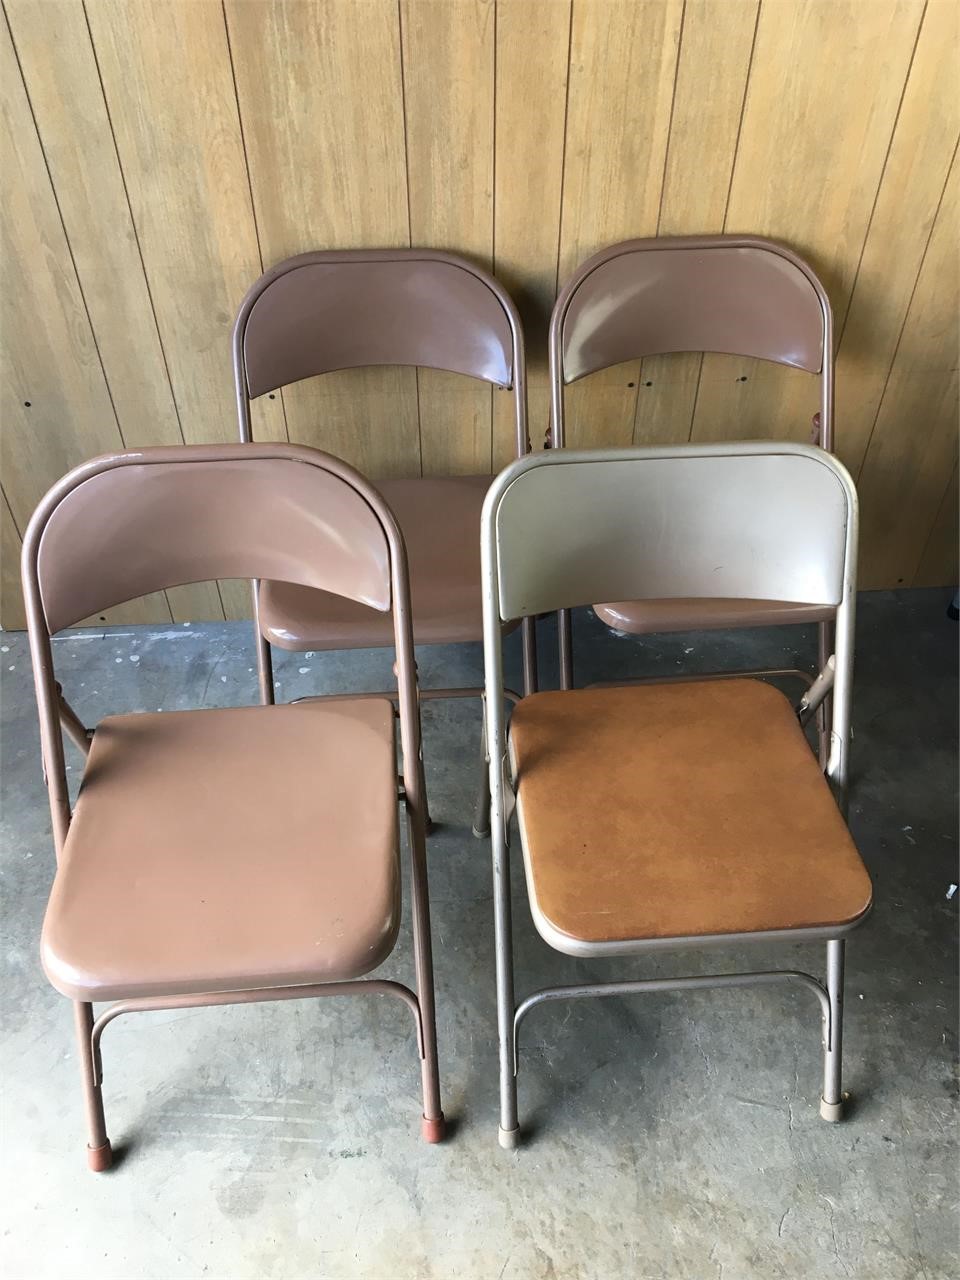 4 Brown Folding Chairs